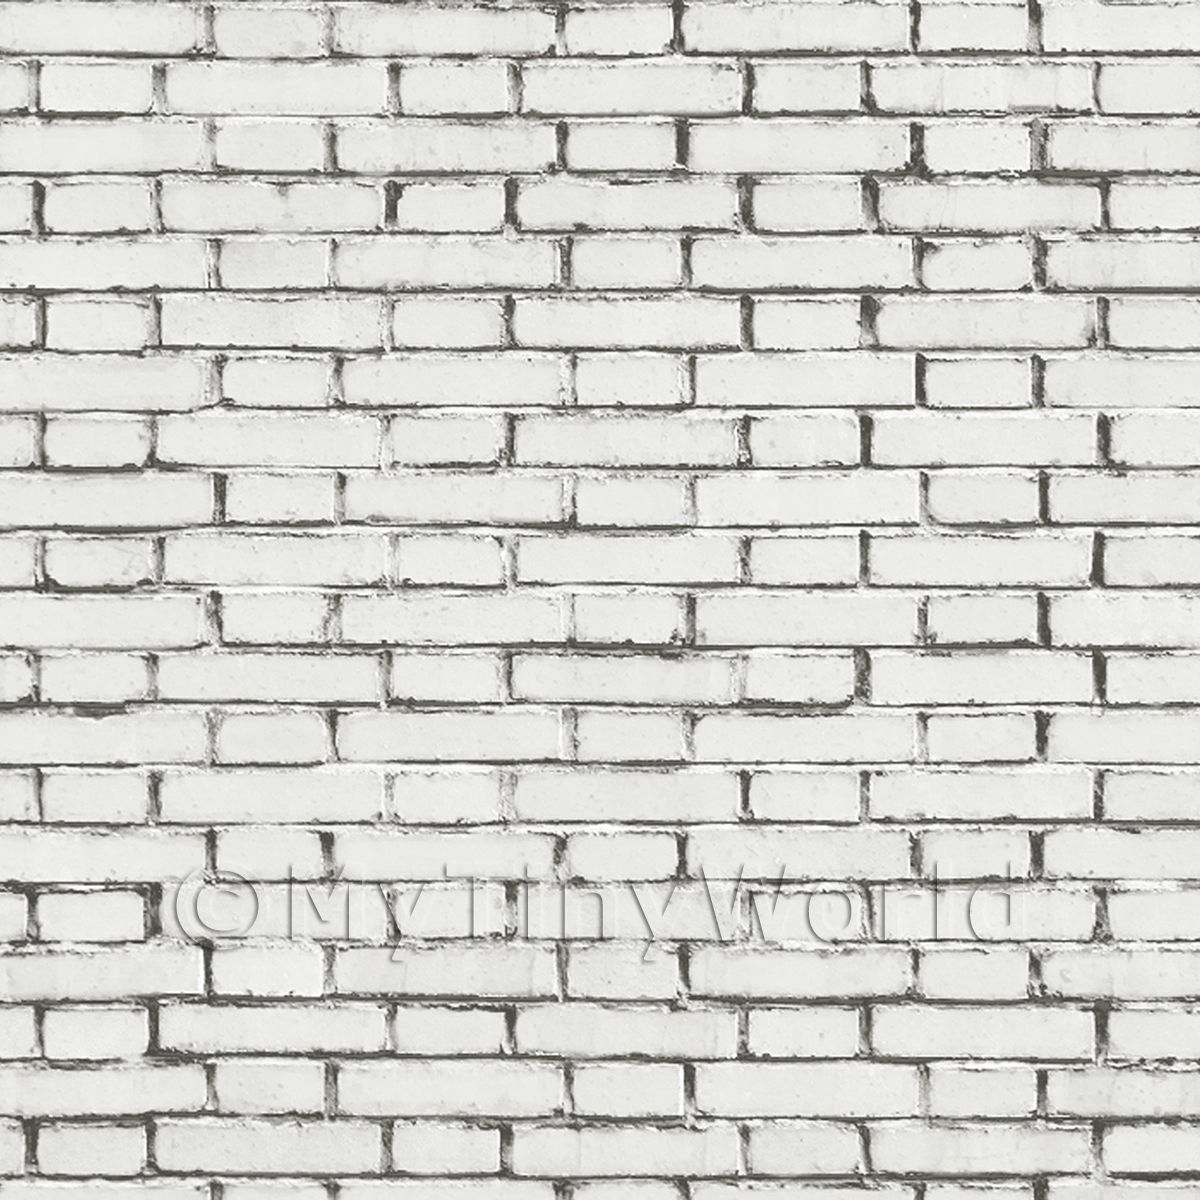 Dolls House Miniature White Painted Brick Pattern Cladding 1:12th Scale 